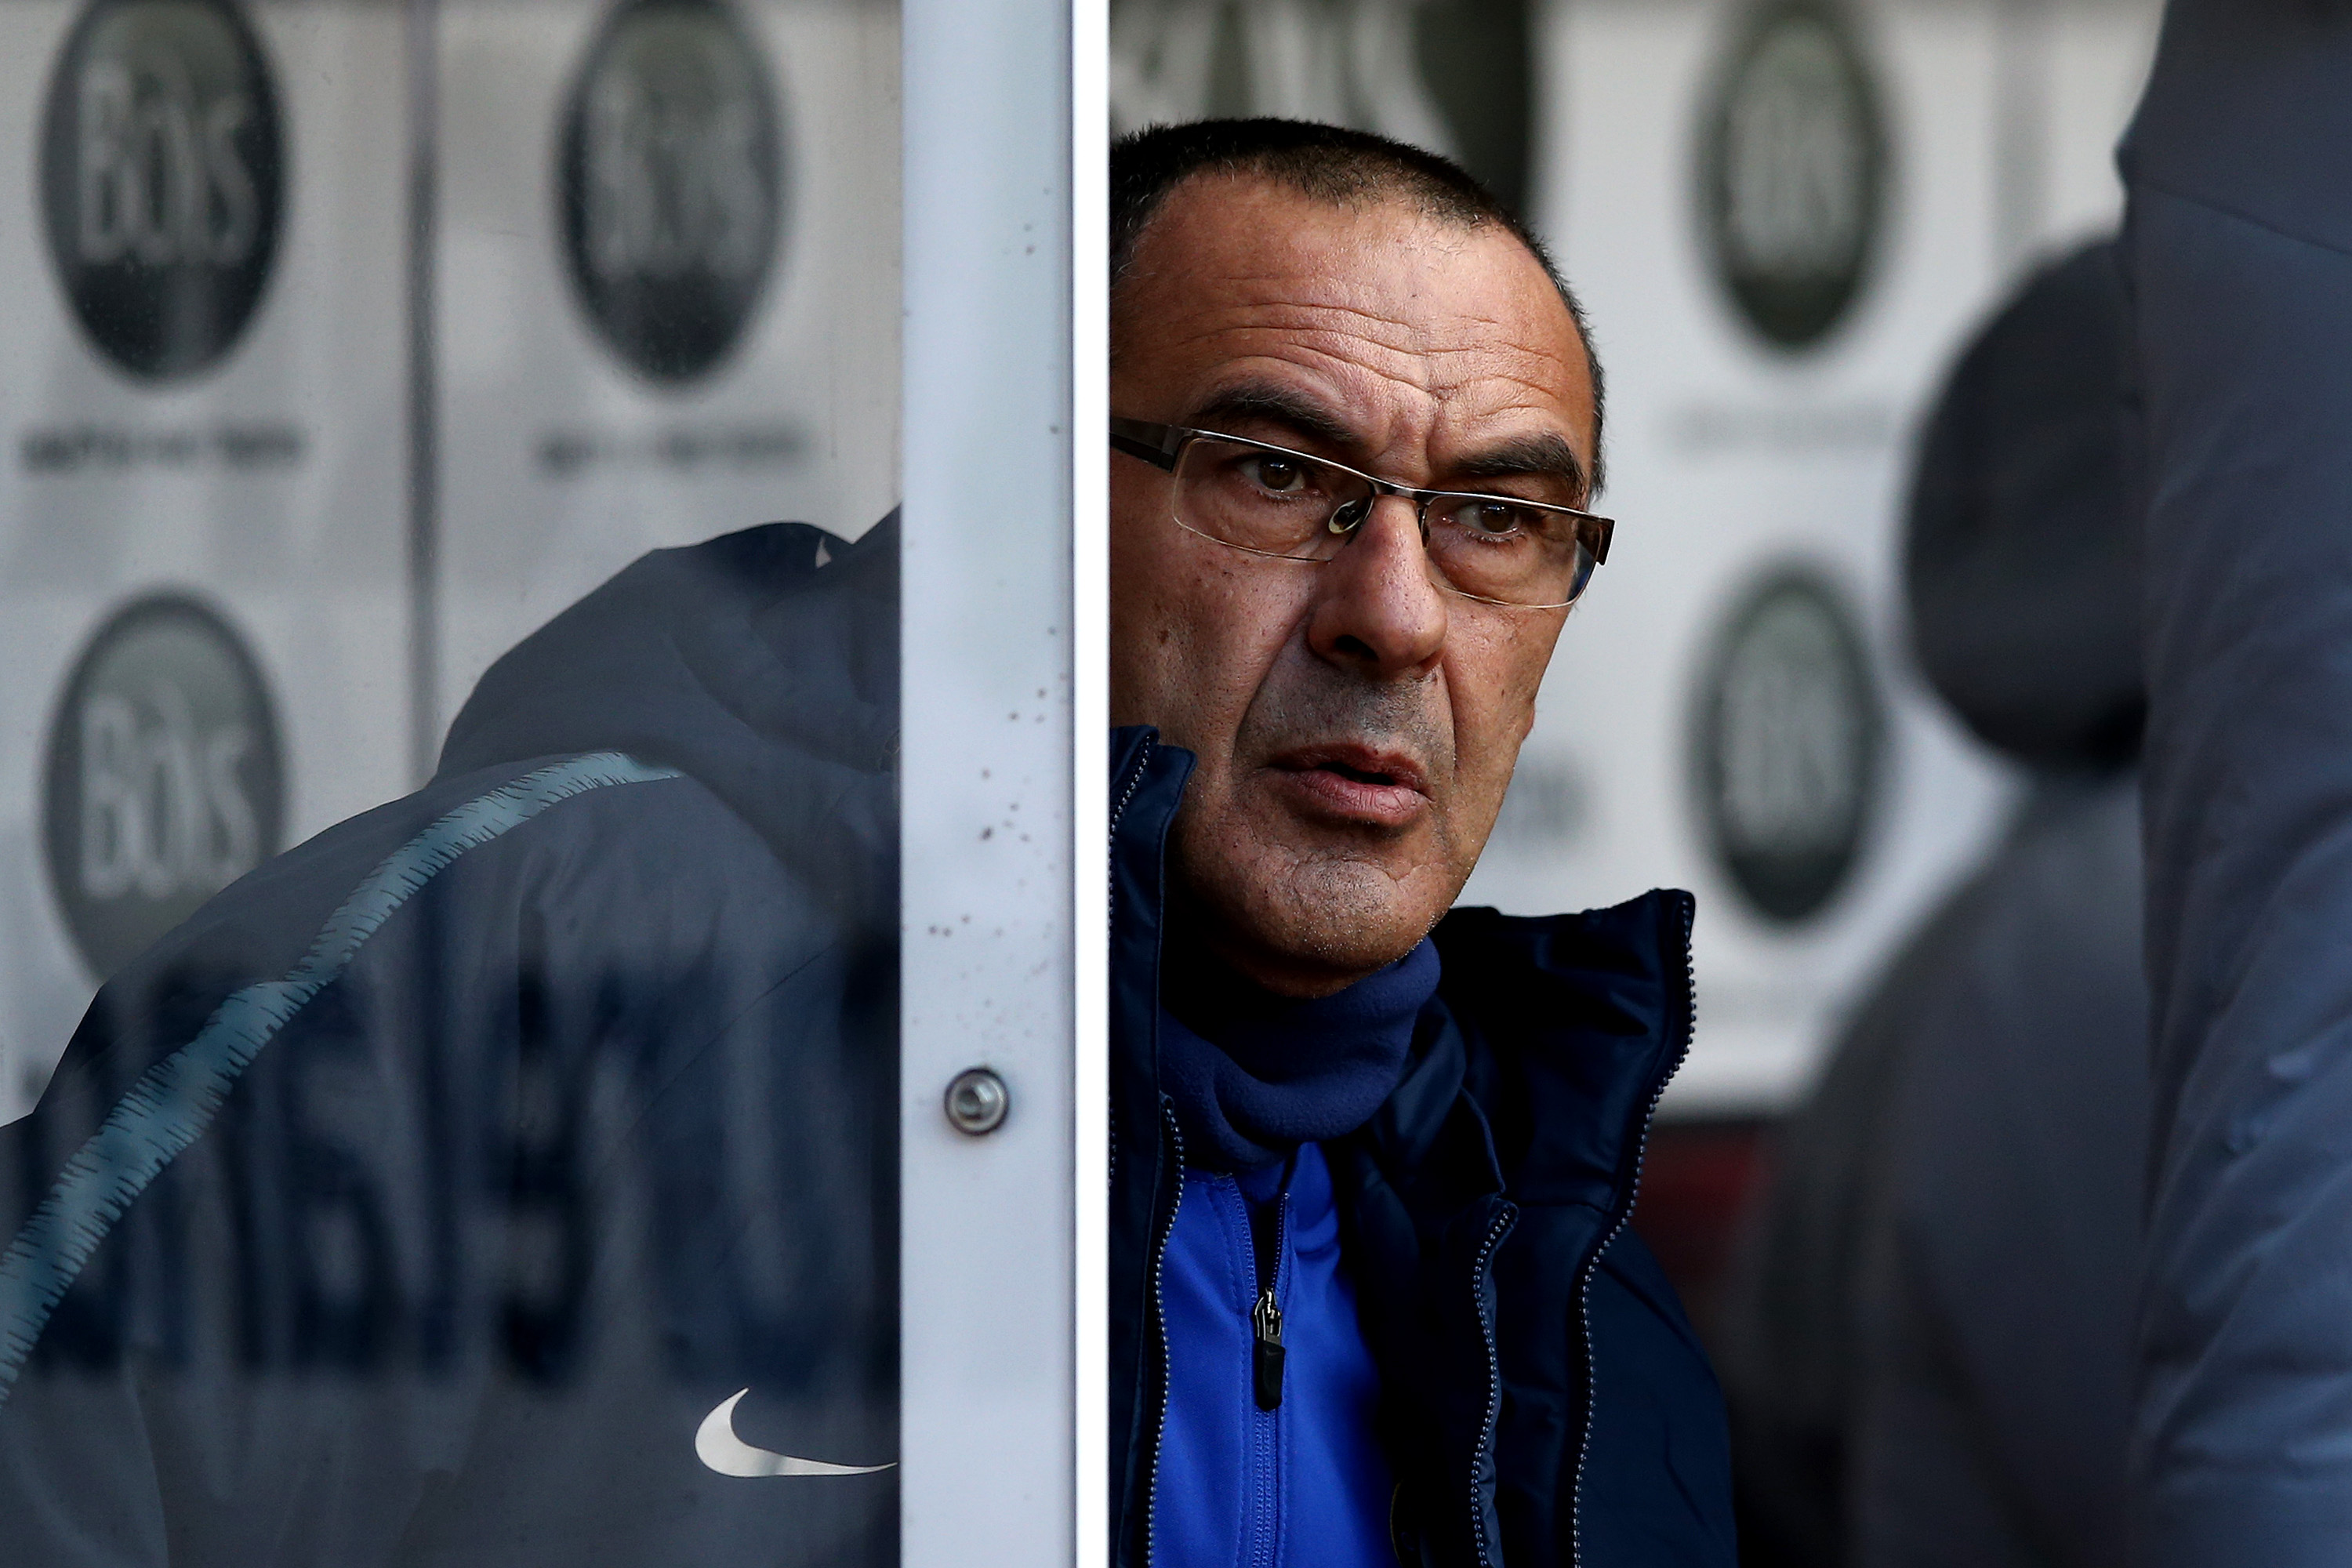 BURNLEY, ENGLAND - OCTOBER 28:  Maurizio Sarri, Manager of Chelsea looks on prior to the Premier League match between Burnley FC and Chelsea FC at Turf Moor on October 28, 2018 in Burnley, United Kingdom.  (Photo by Jan Kruger/Getty Images)